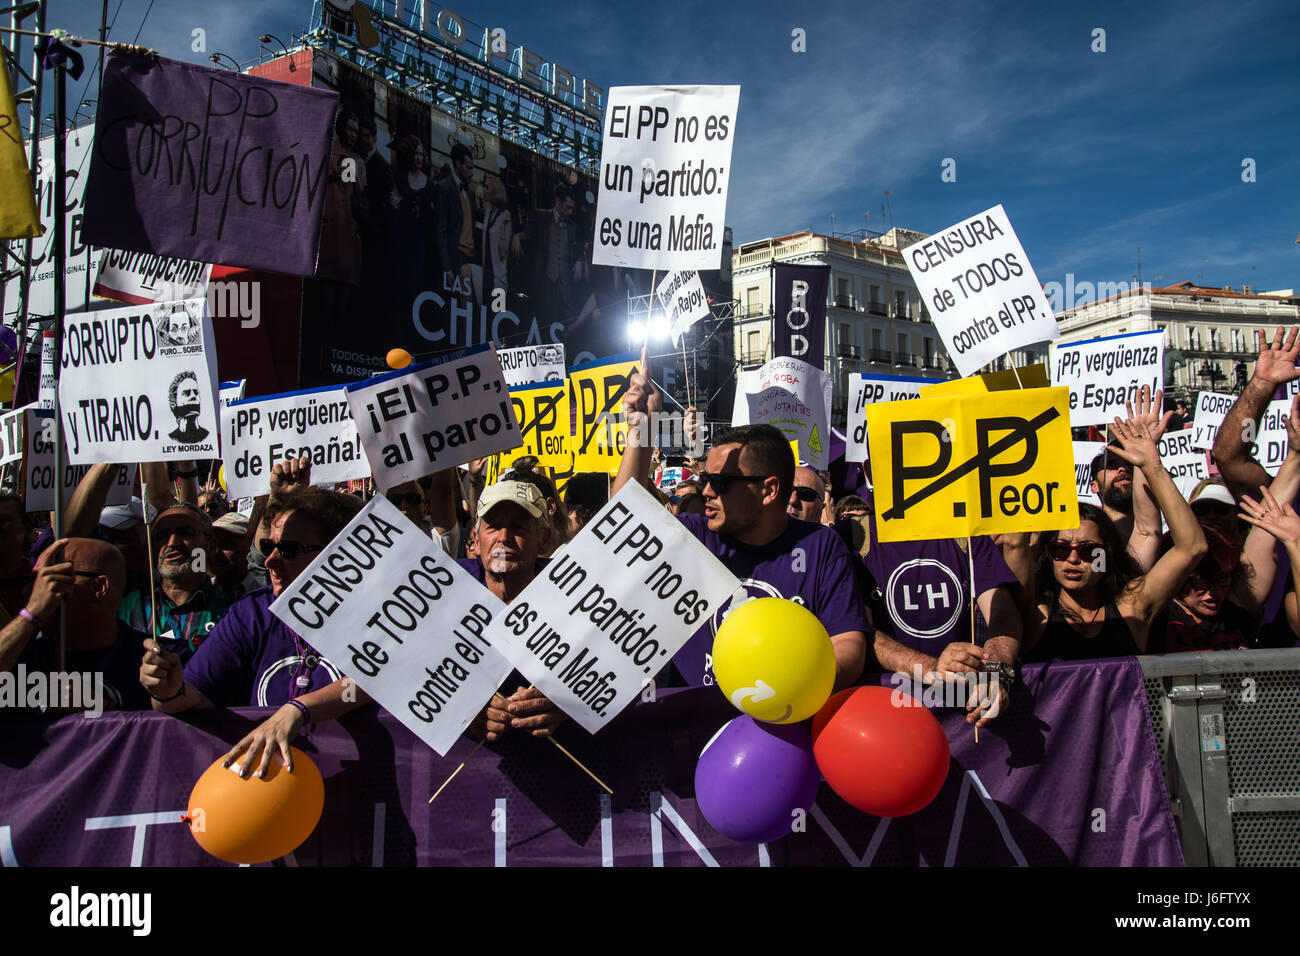 Madrid, Spain. 20th May, 2017. People protesting against Popular Party supporting Podemos party for a vote of no confidence to President Mariano Rajoy. Credit: Marcos del Mazo/Alamy Live News Stock Photo